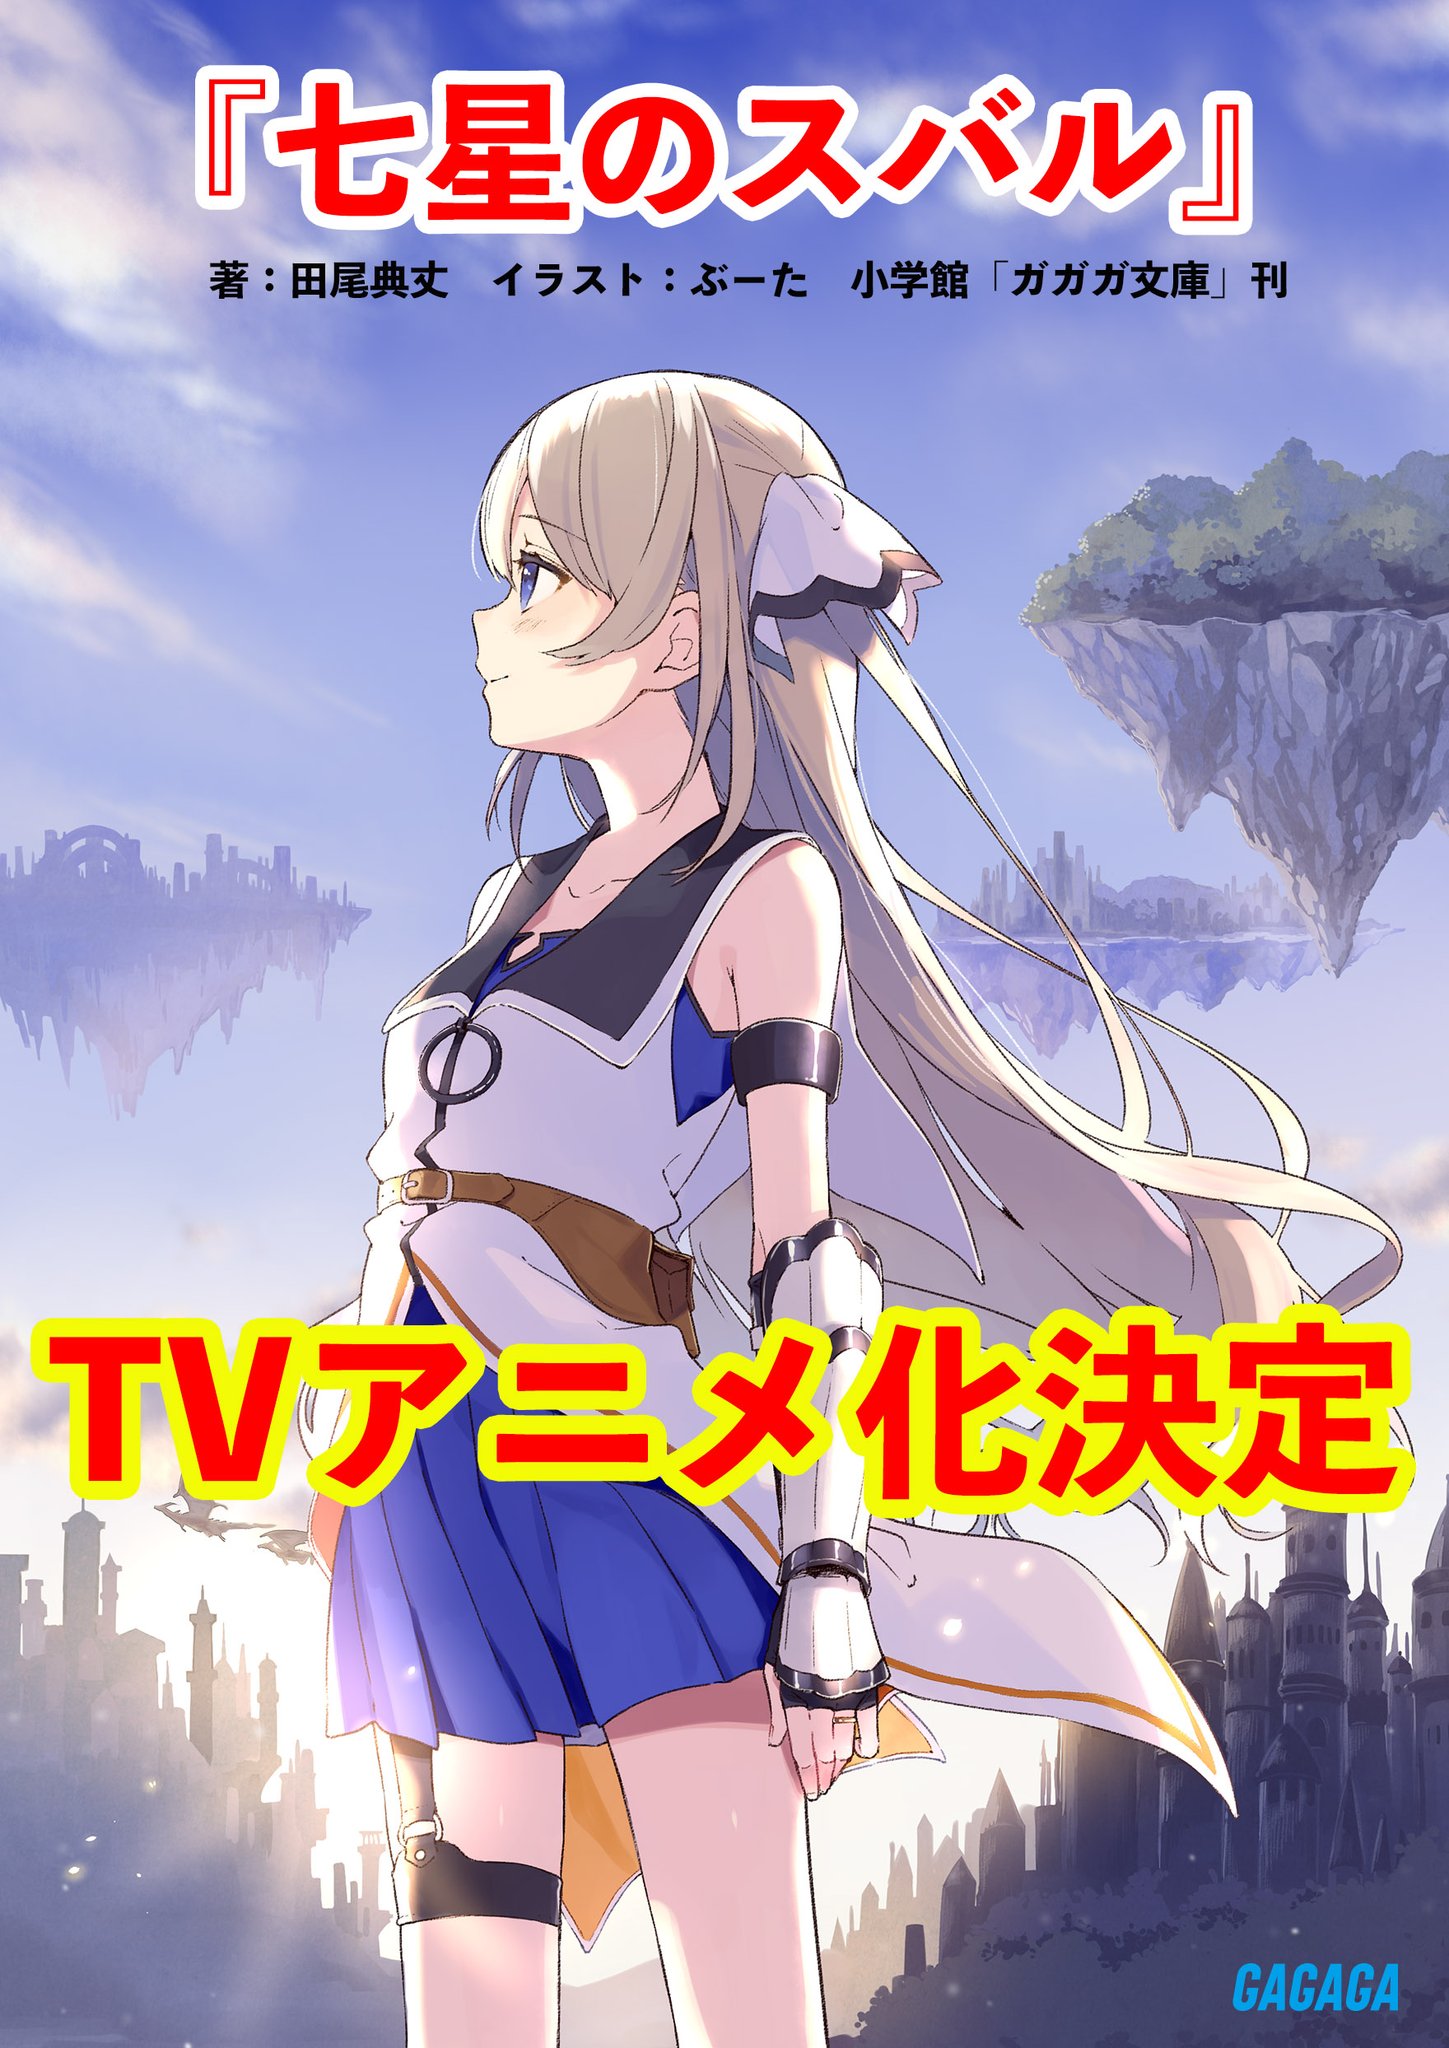 "Anohana" Meets "Sword Art Online" In Newly Announced " Seven Senses of the Re'Union" Anime